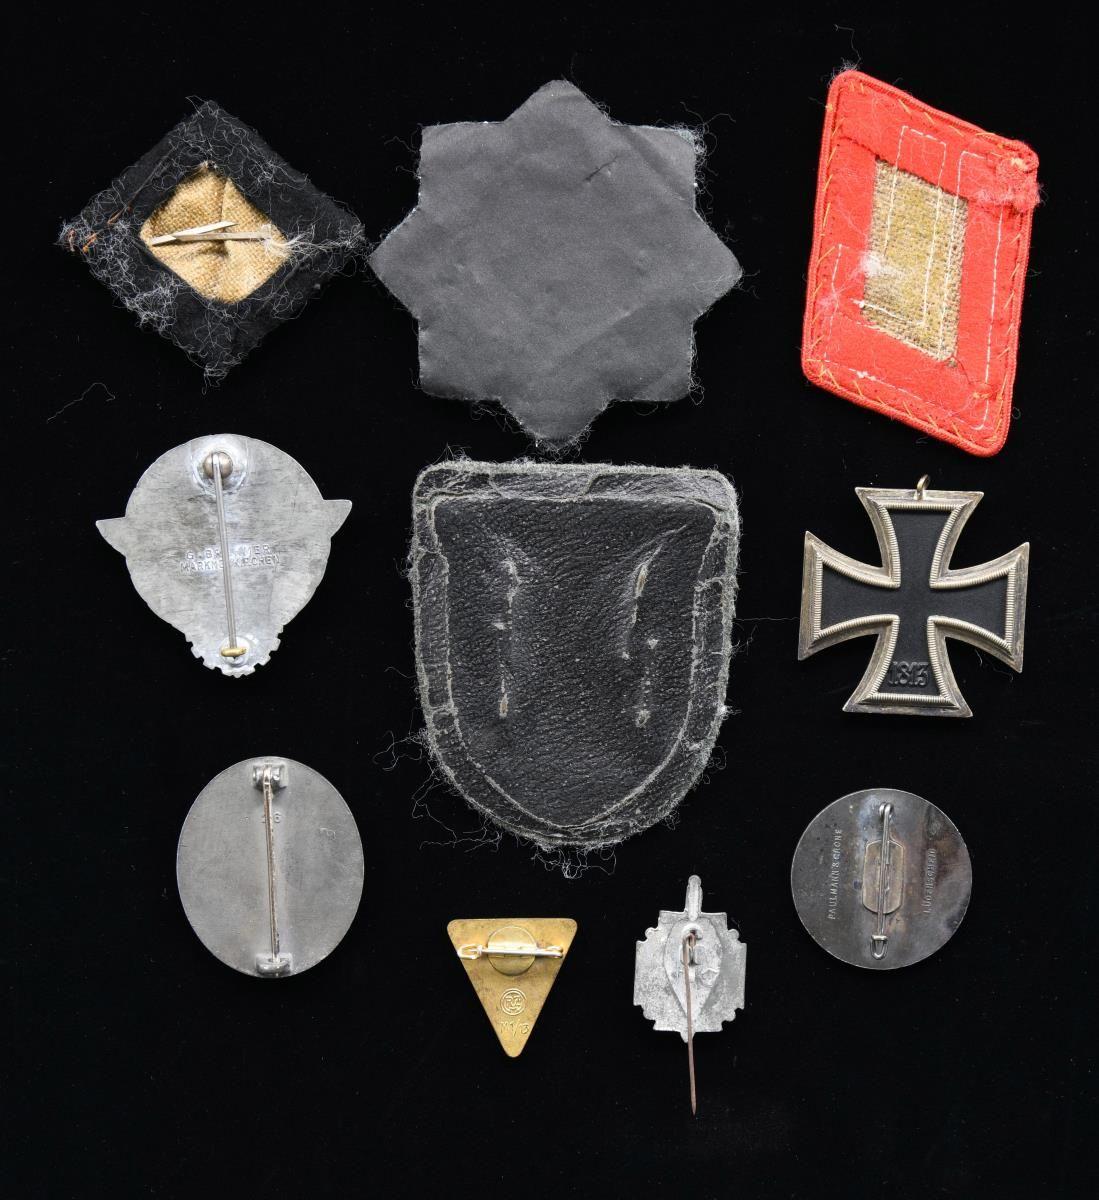 WWII GERMAN AWARDS, PINS, BADGES, & MORE.